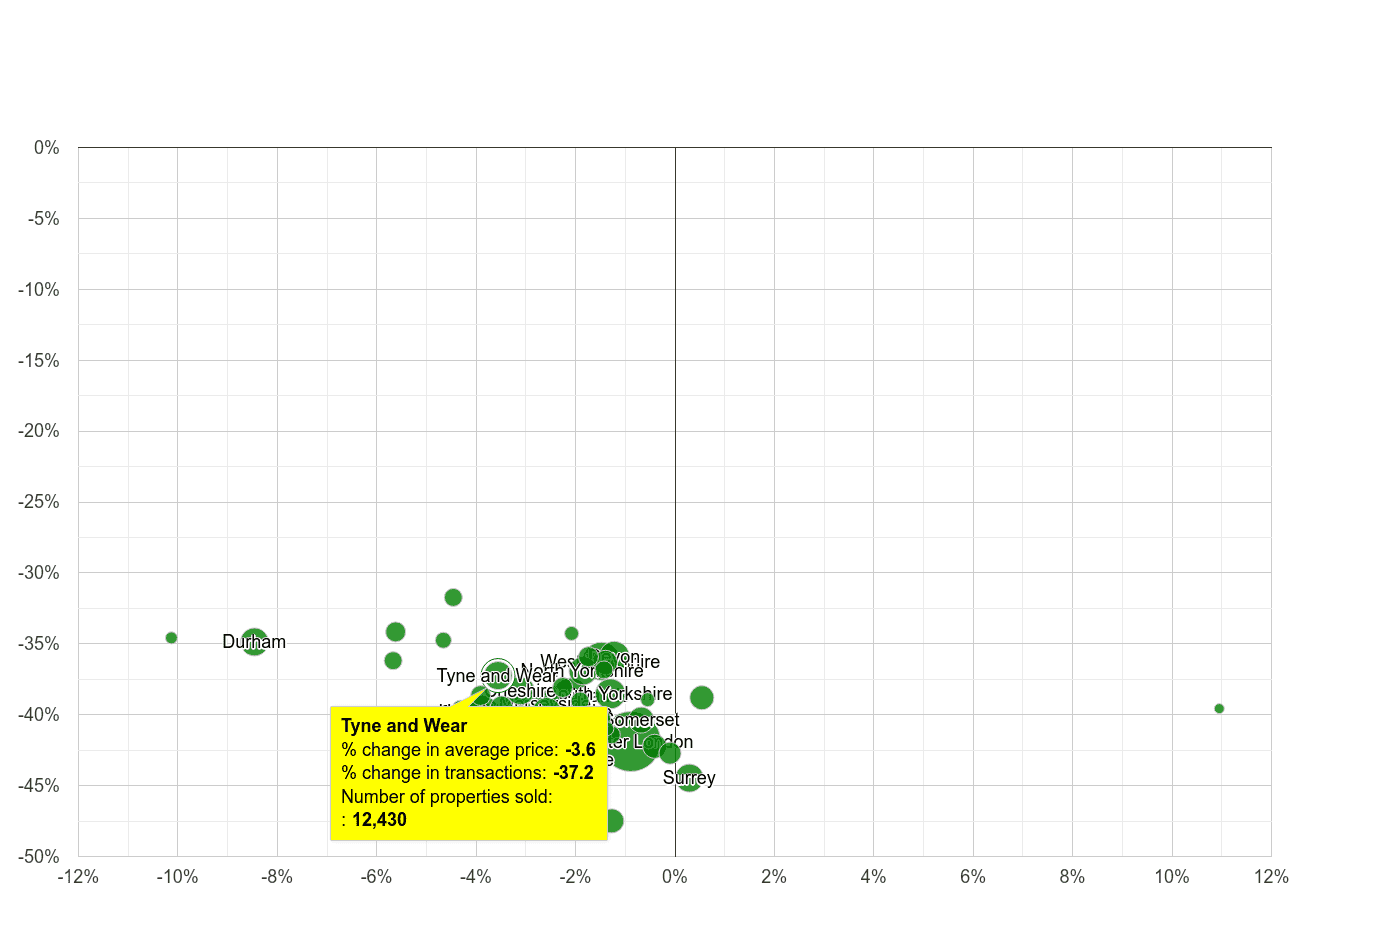 Tyne and Wear property price and sales volume change relative to other counties